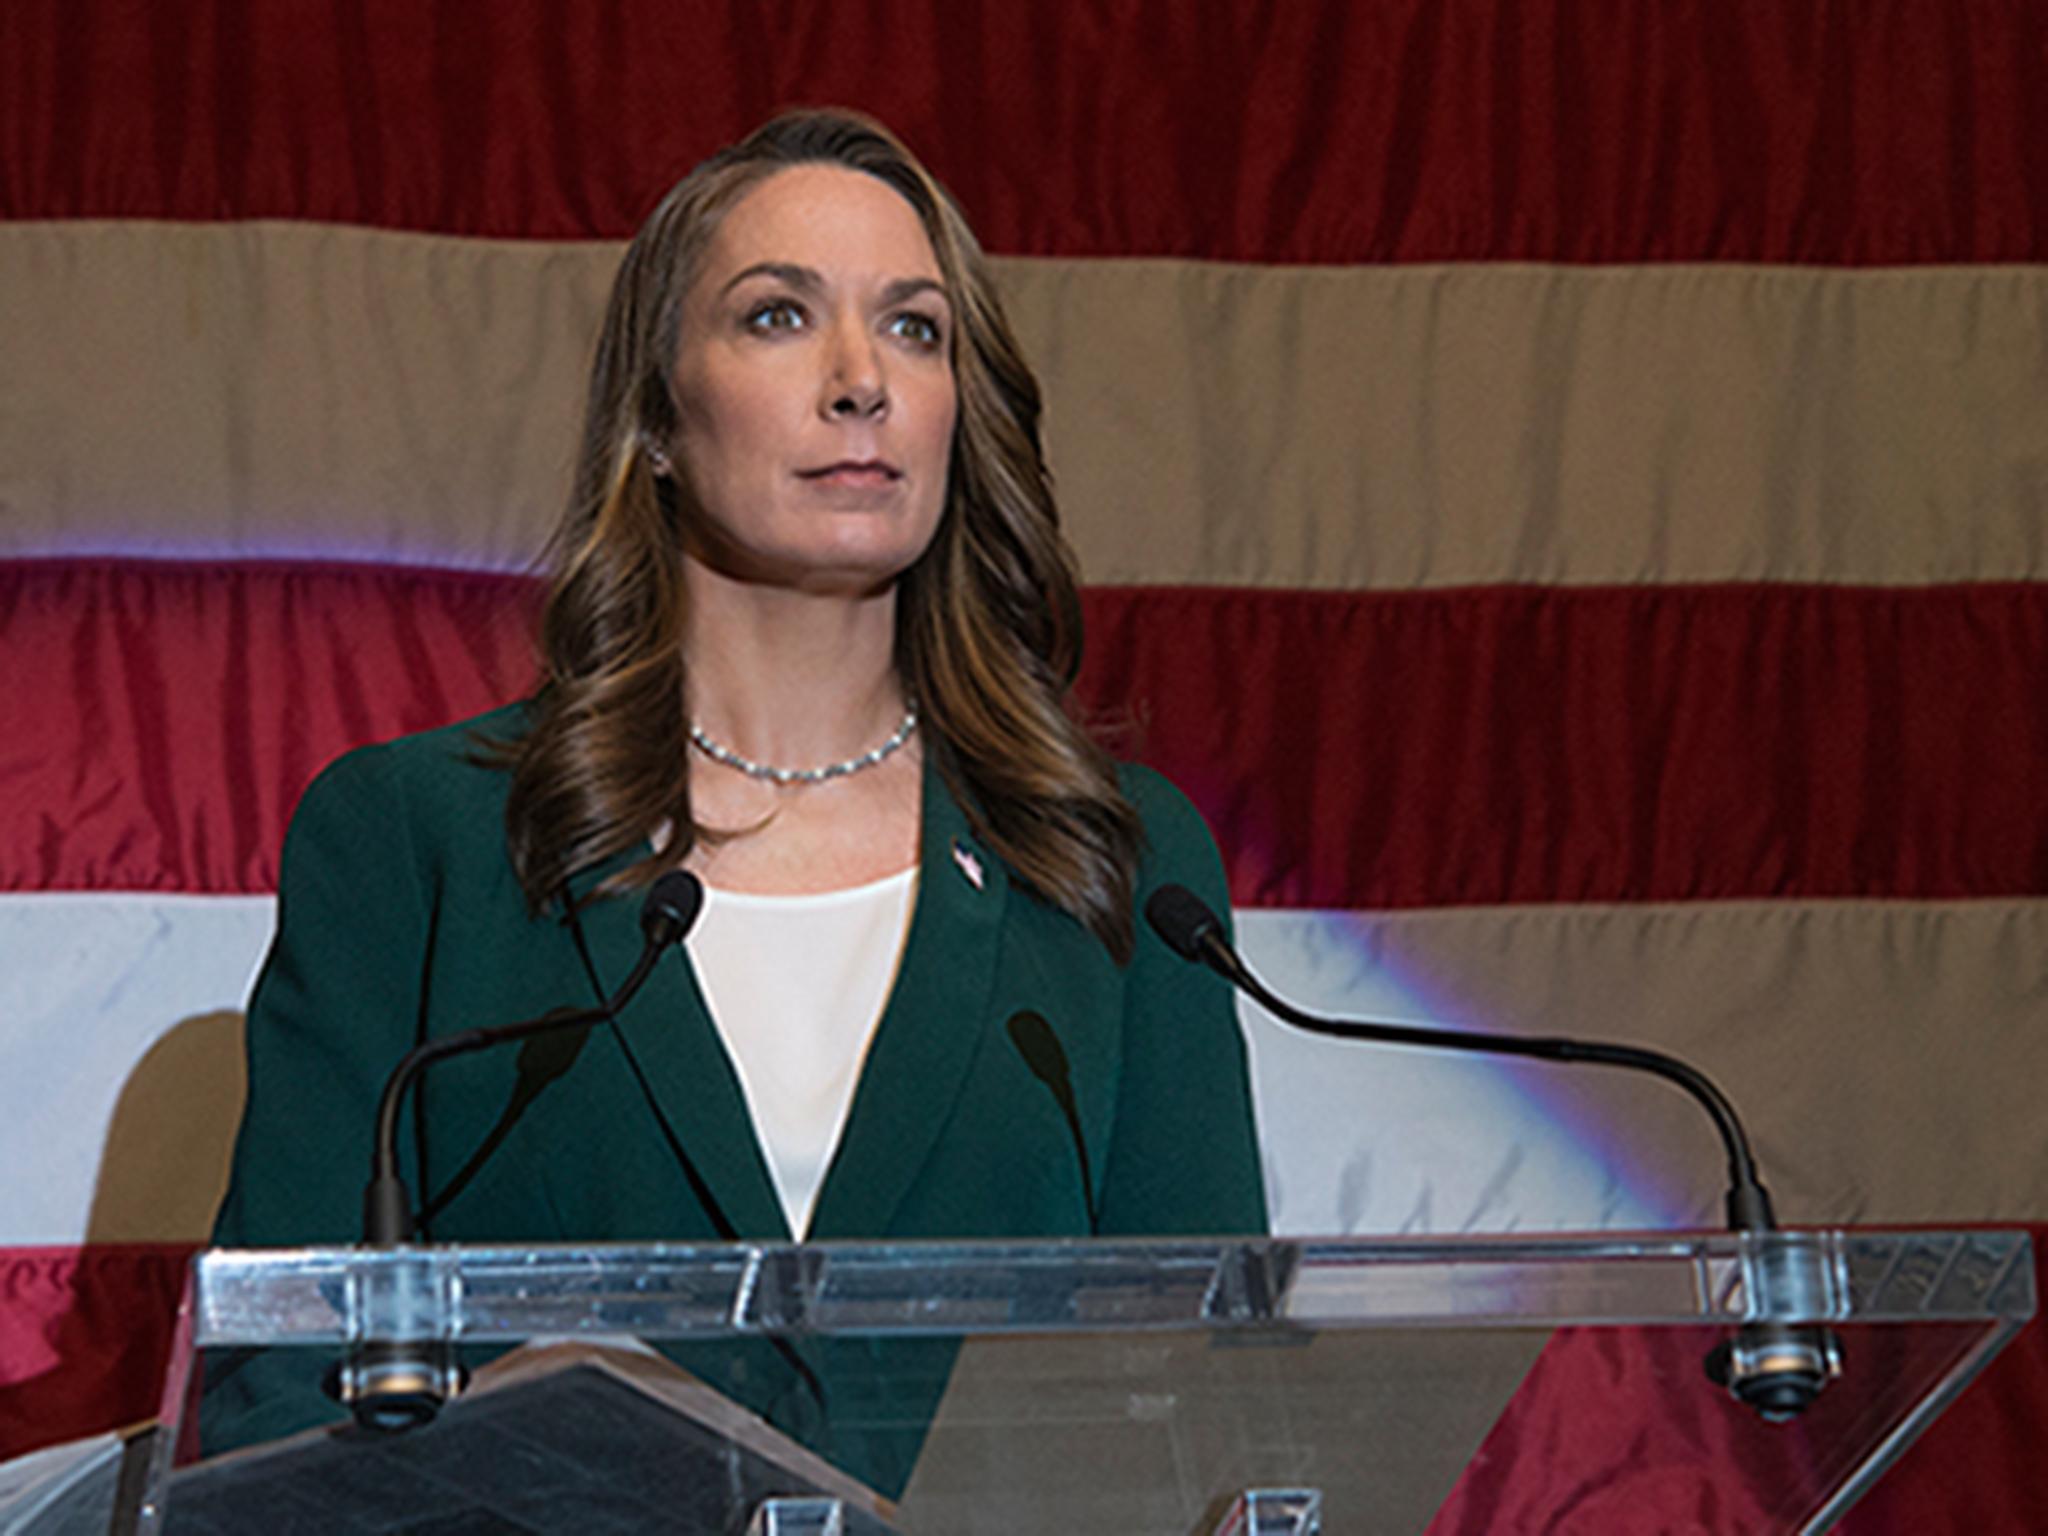 Elizabeth Marvel who plays the president-elect in 'Homeland' feels no ill will toward the character actress label largely because the term is not limited to 'plays all the secretaries' way it once did